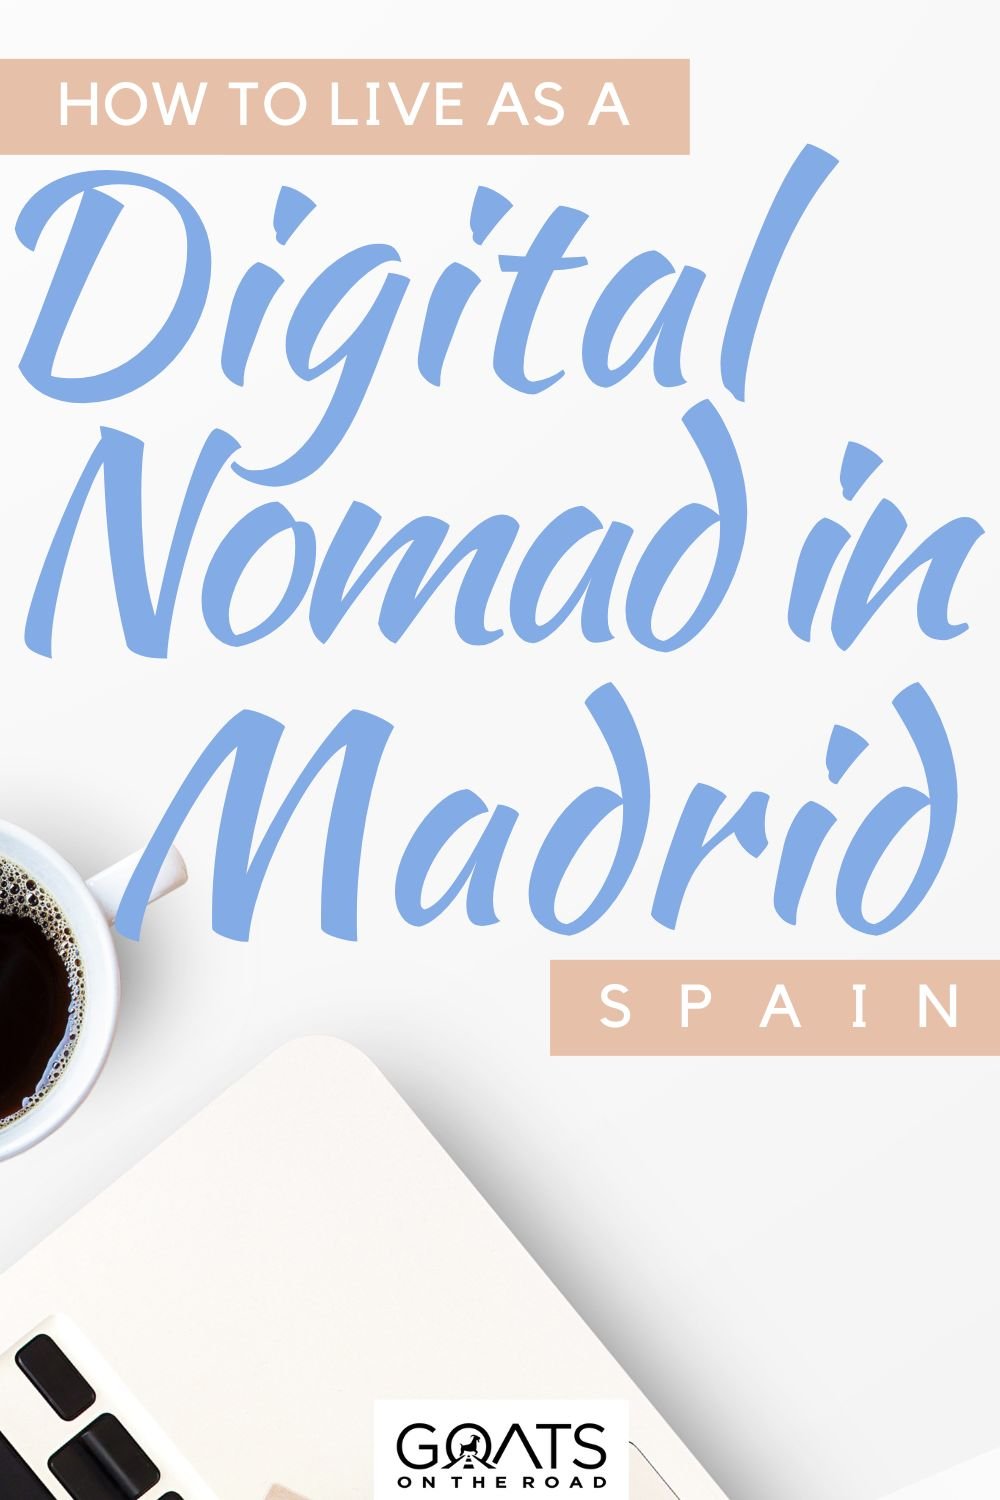 “How To Live As A Digital Nomad in Madrid, Spain